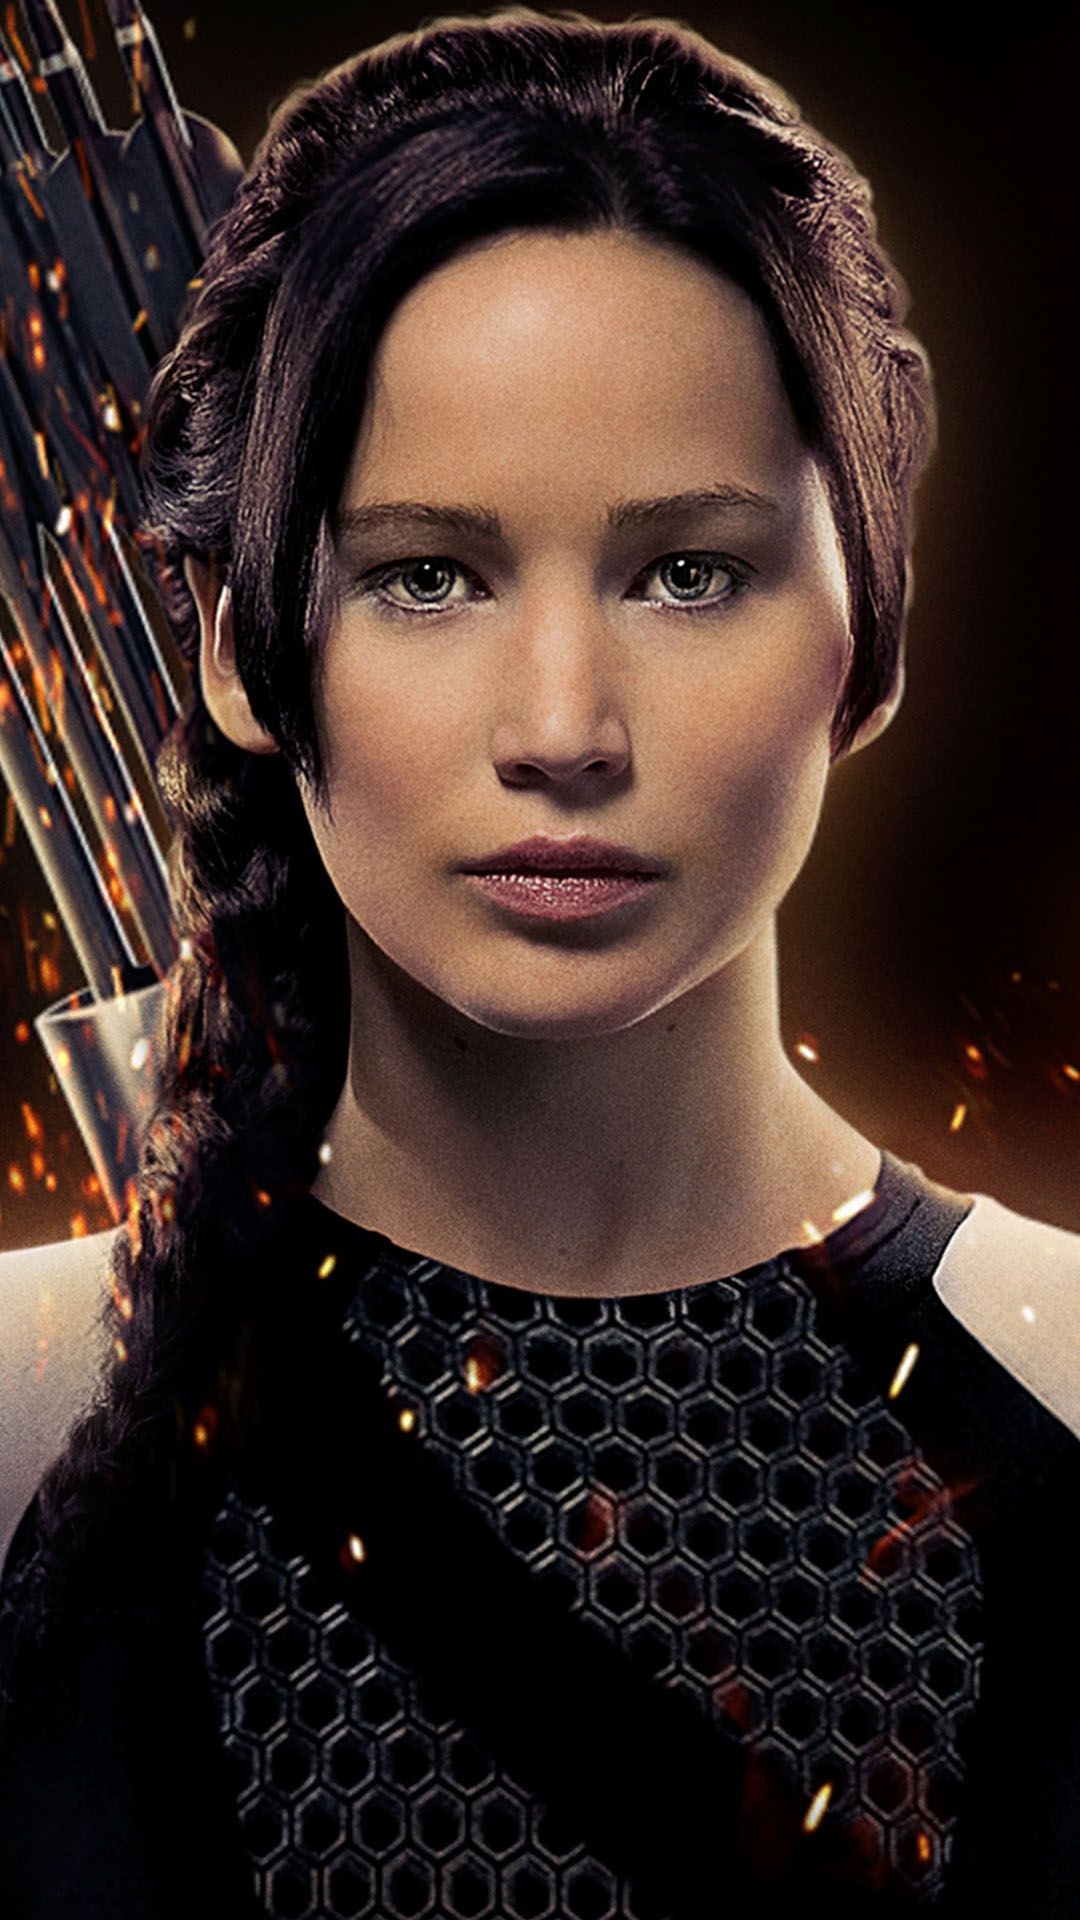 Hunger Games names, Hunger Games characters, Jennifer Lawrence Hunger Games, 1080x1920 Full HD Phone